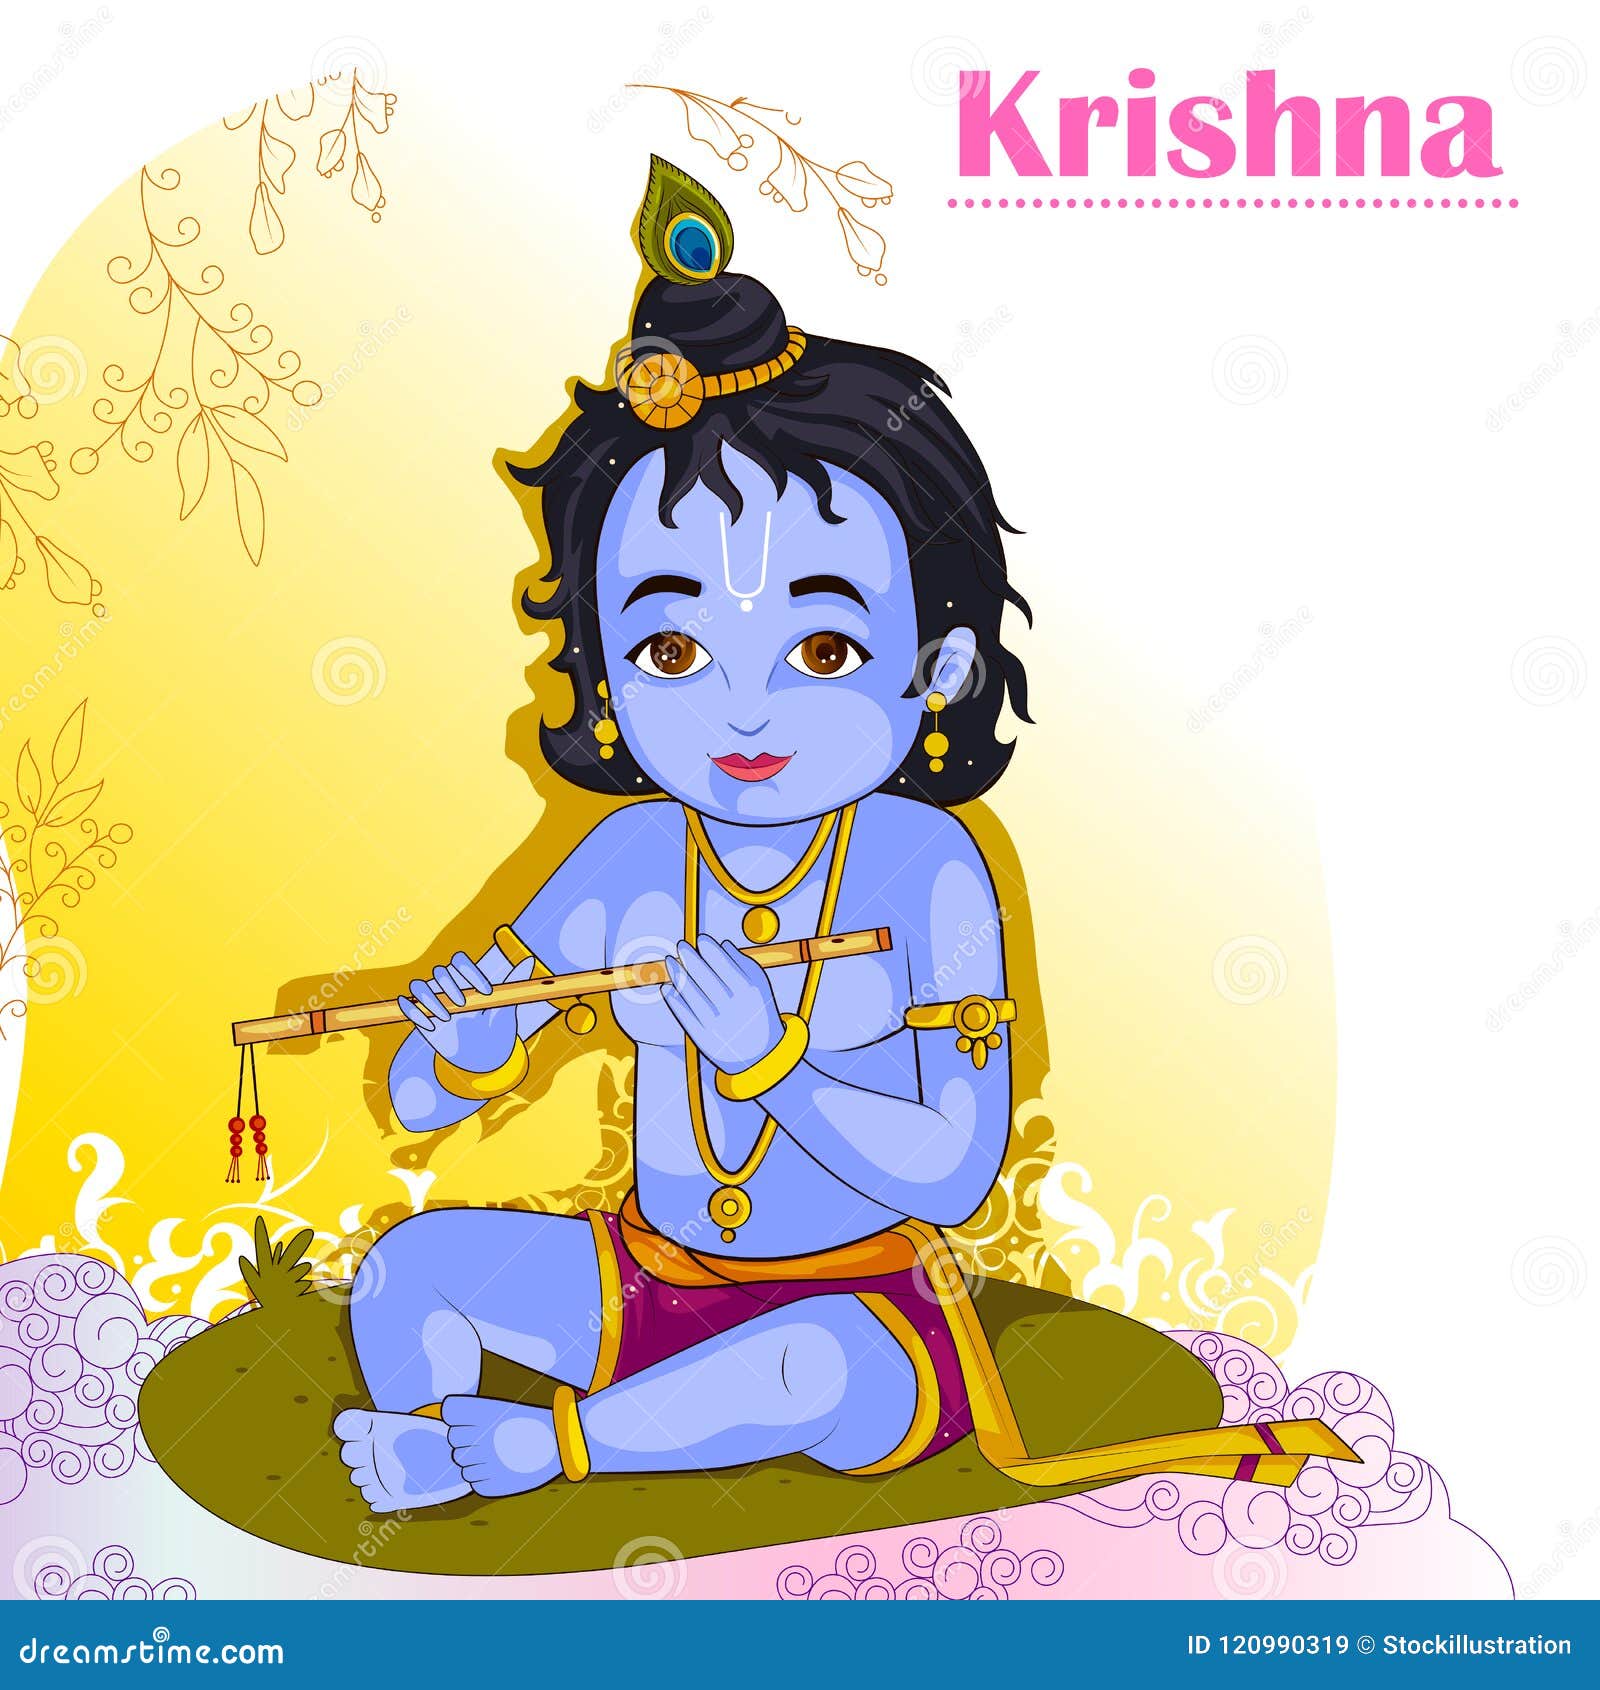 Aggregate 131+ little krishna with flute drawing latest